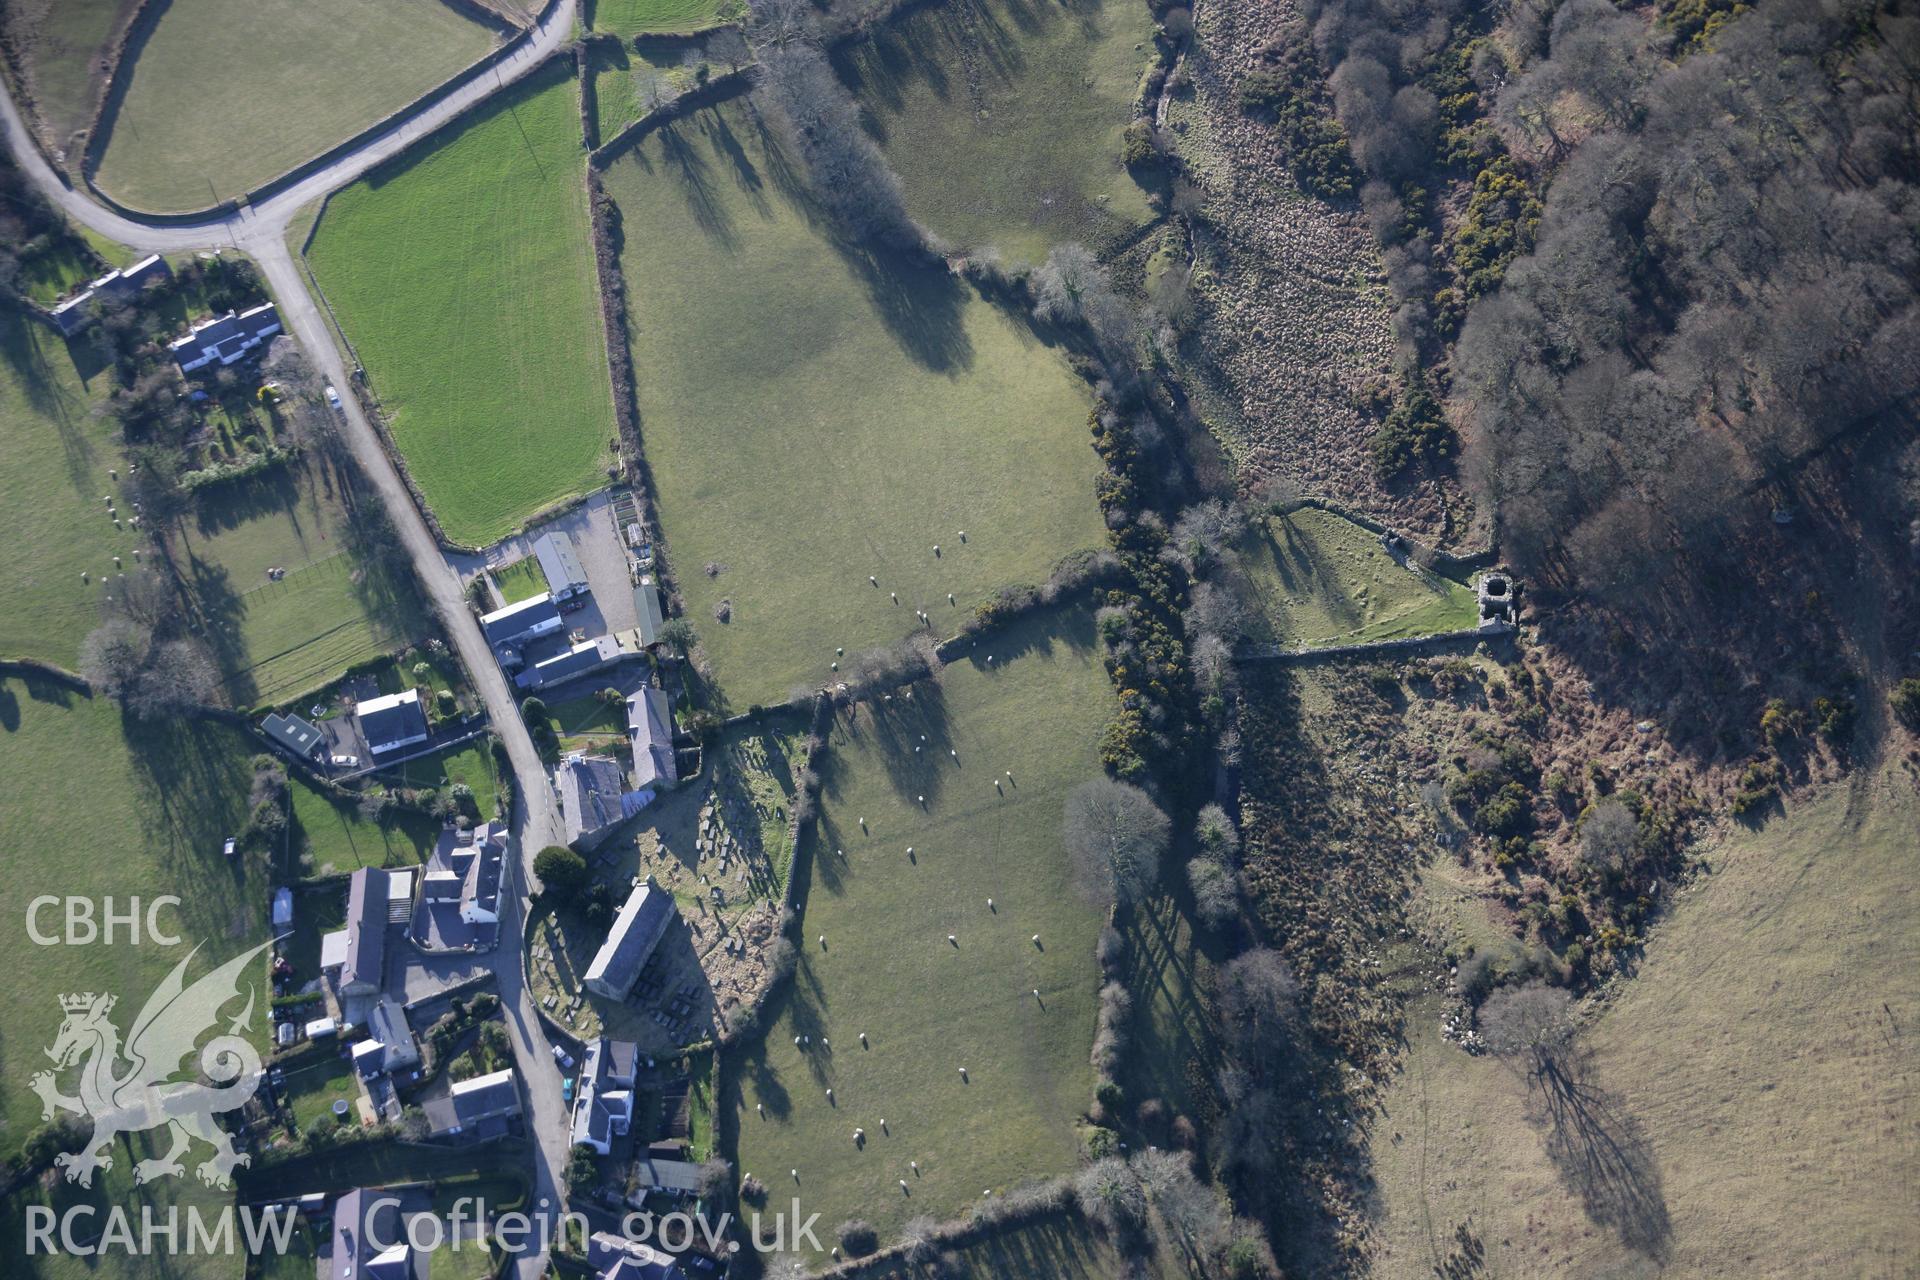 RCAHMW colour oblique aerial photograph of St Cybi's Well from the north-east. Taken on 09 February 2006 by Toby Driver.